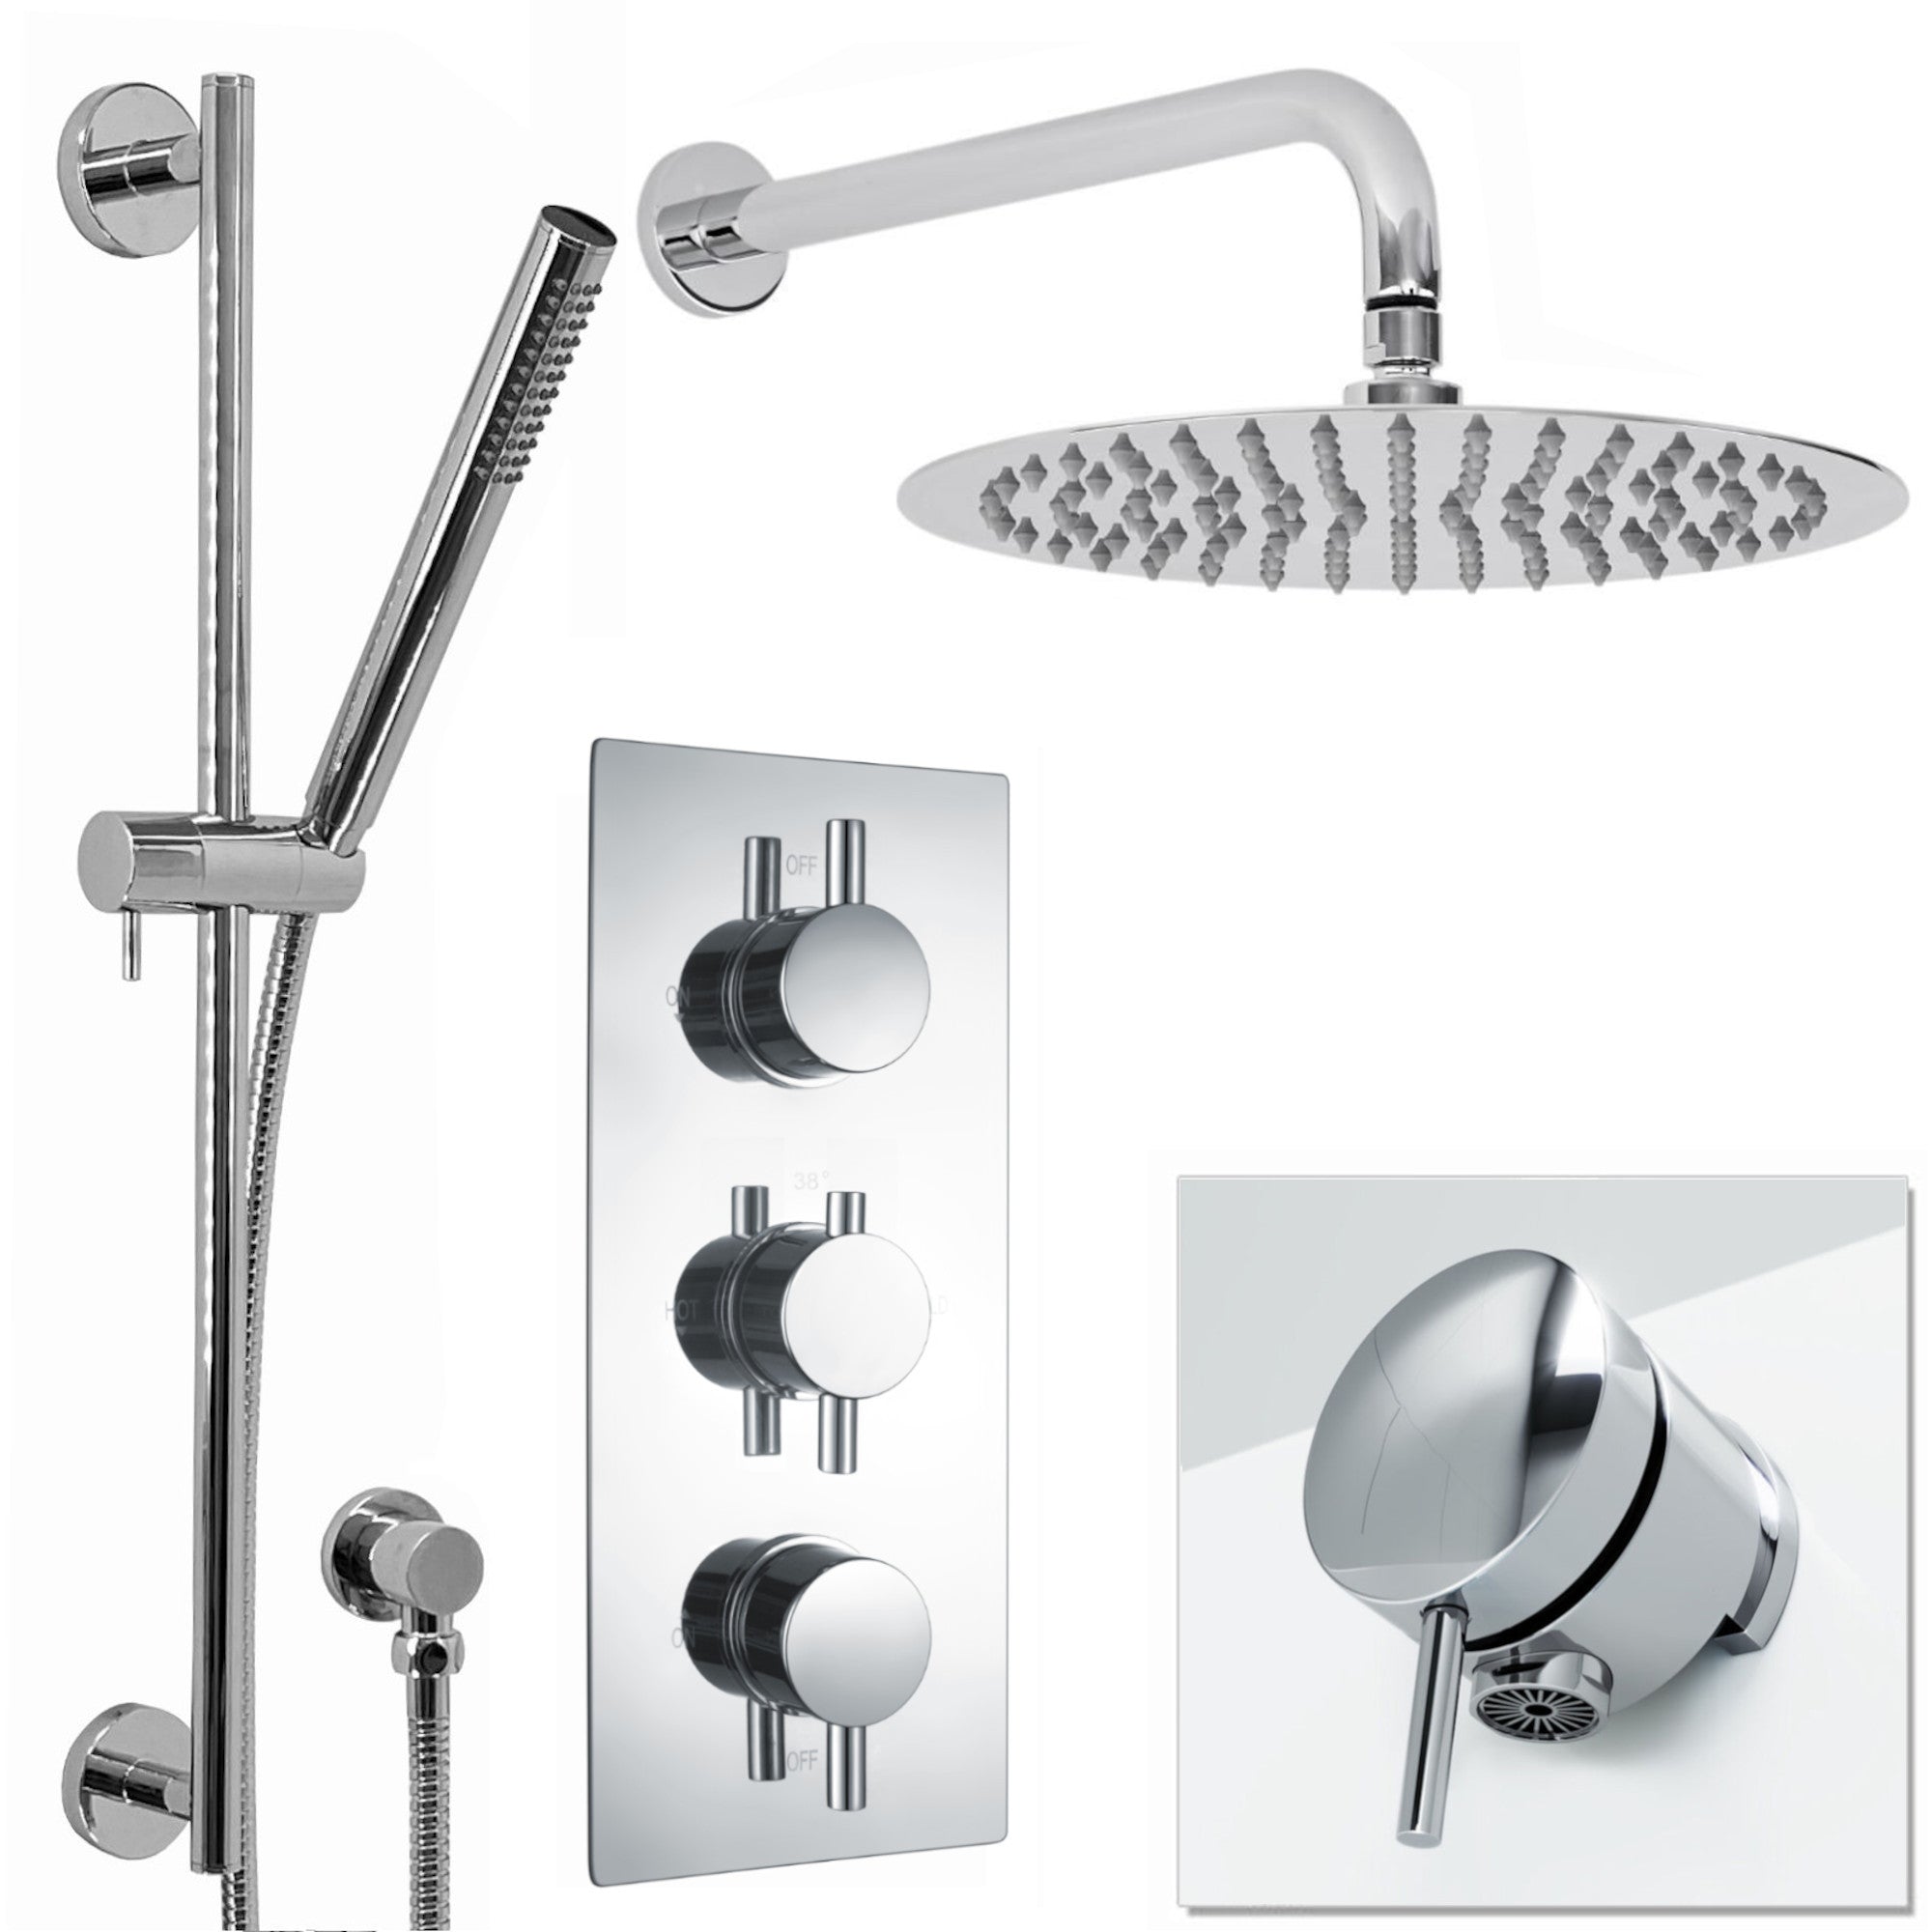 Venice Contemporary Round Concealed Thermostatic Shower Set Incl. Triple Diverter Valve, Wall Fixed 8" Shower Head, Slider Rail Kit, Bath Filler Waste with Overflow - Chrome (3 Outlet)